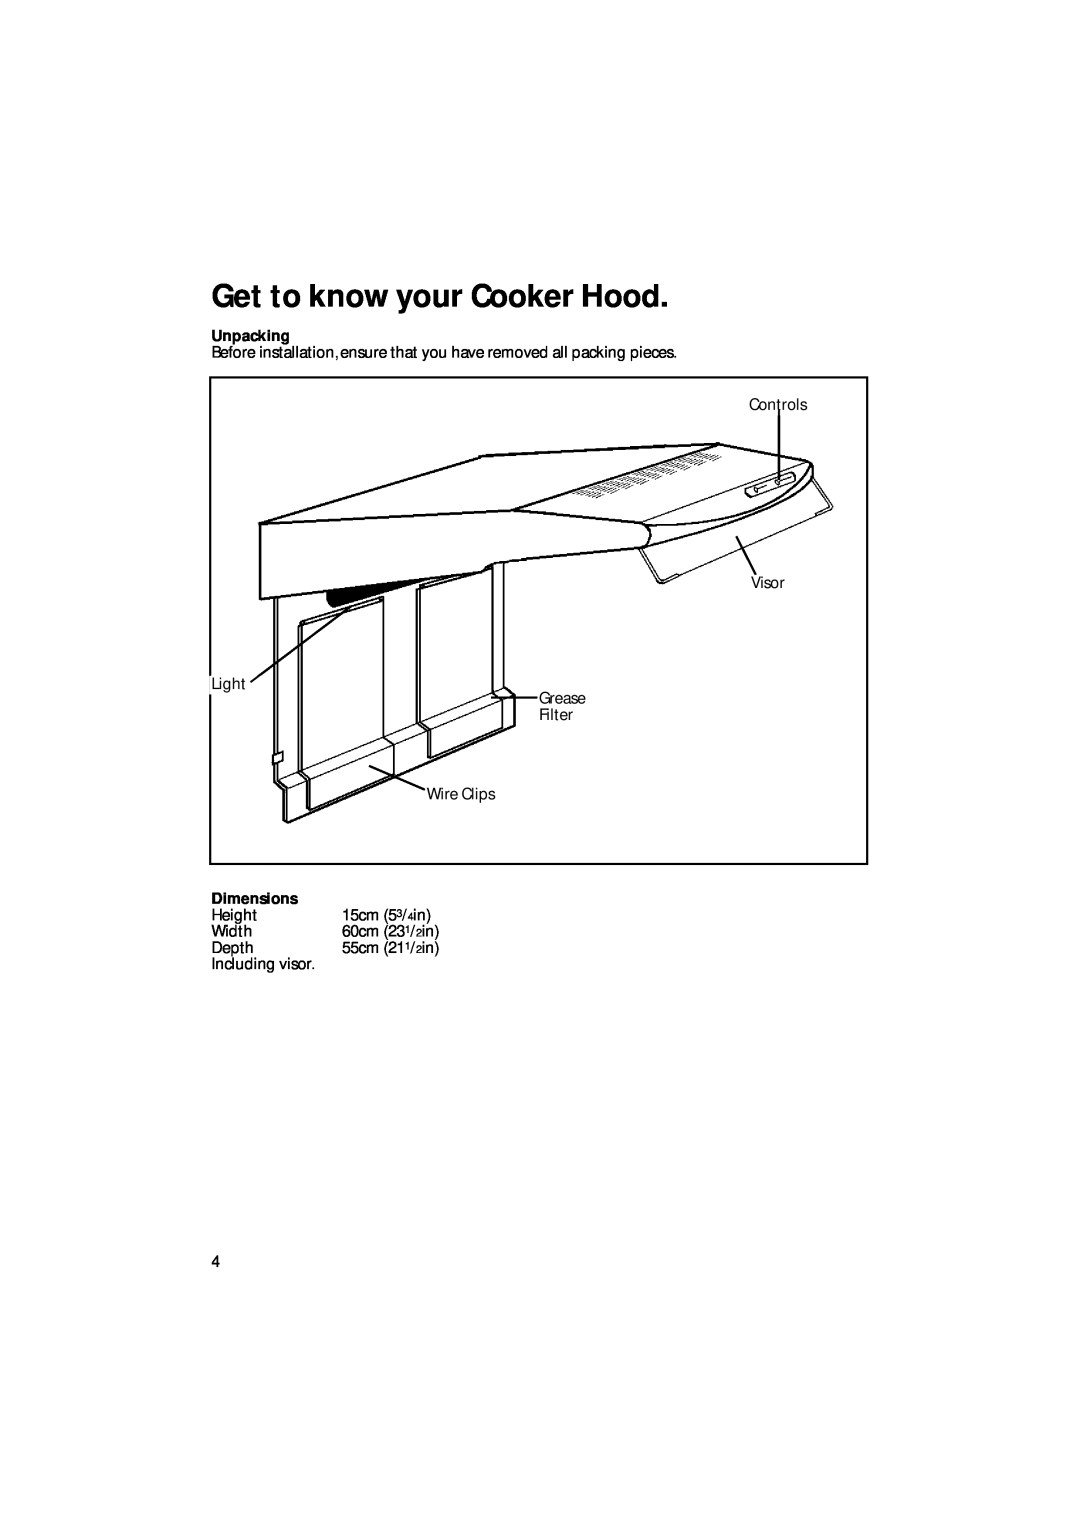 Creda CRV10 manual Get to know your Cooker Hood, Unpacking, Dimensions 